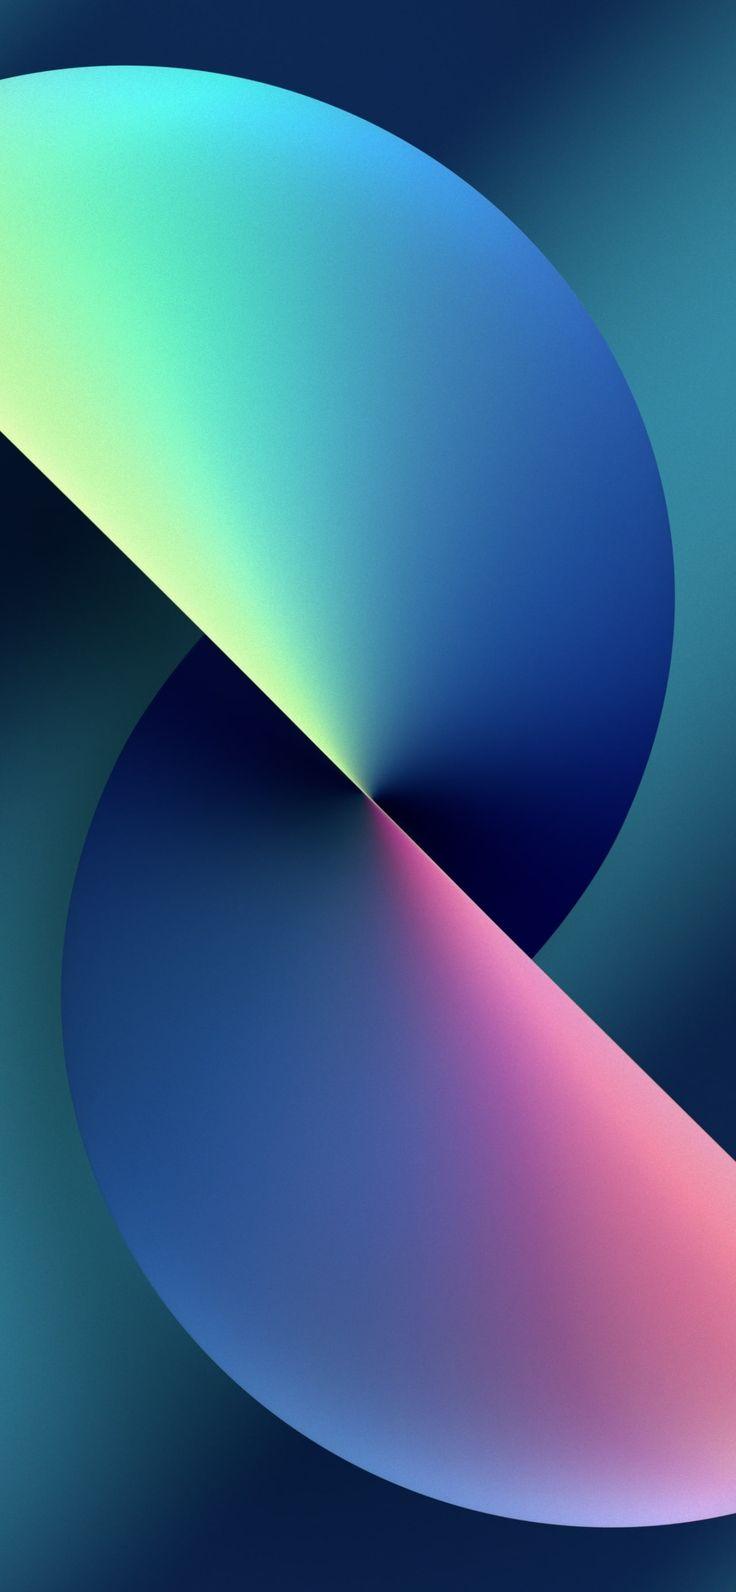 The Official Ios Wallpaper For iPhone In Stock